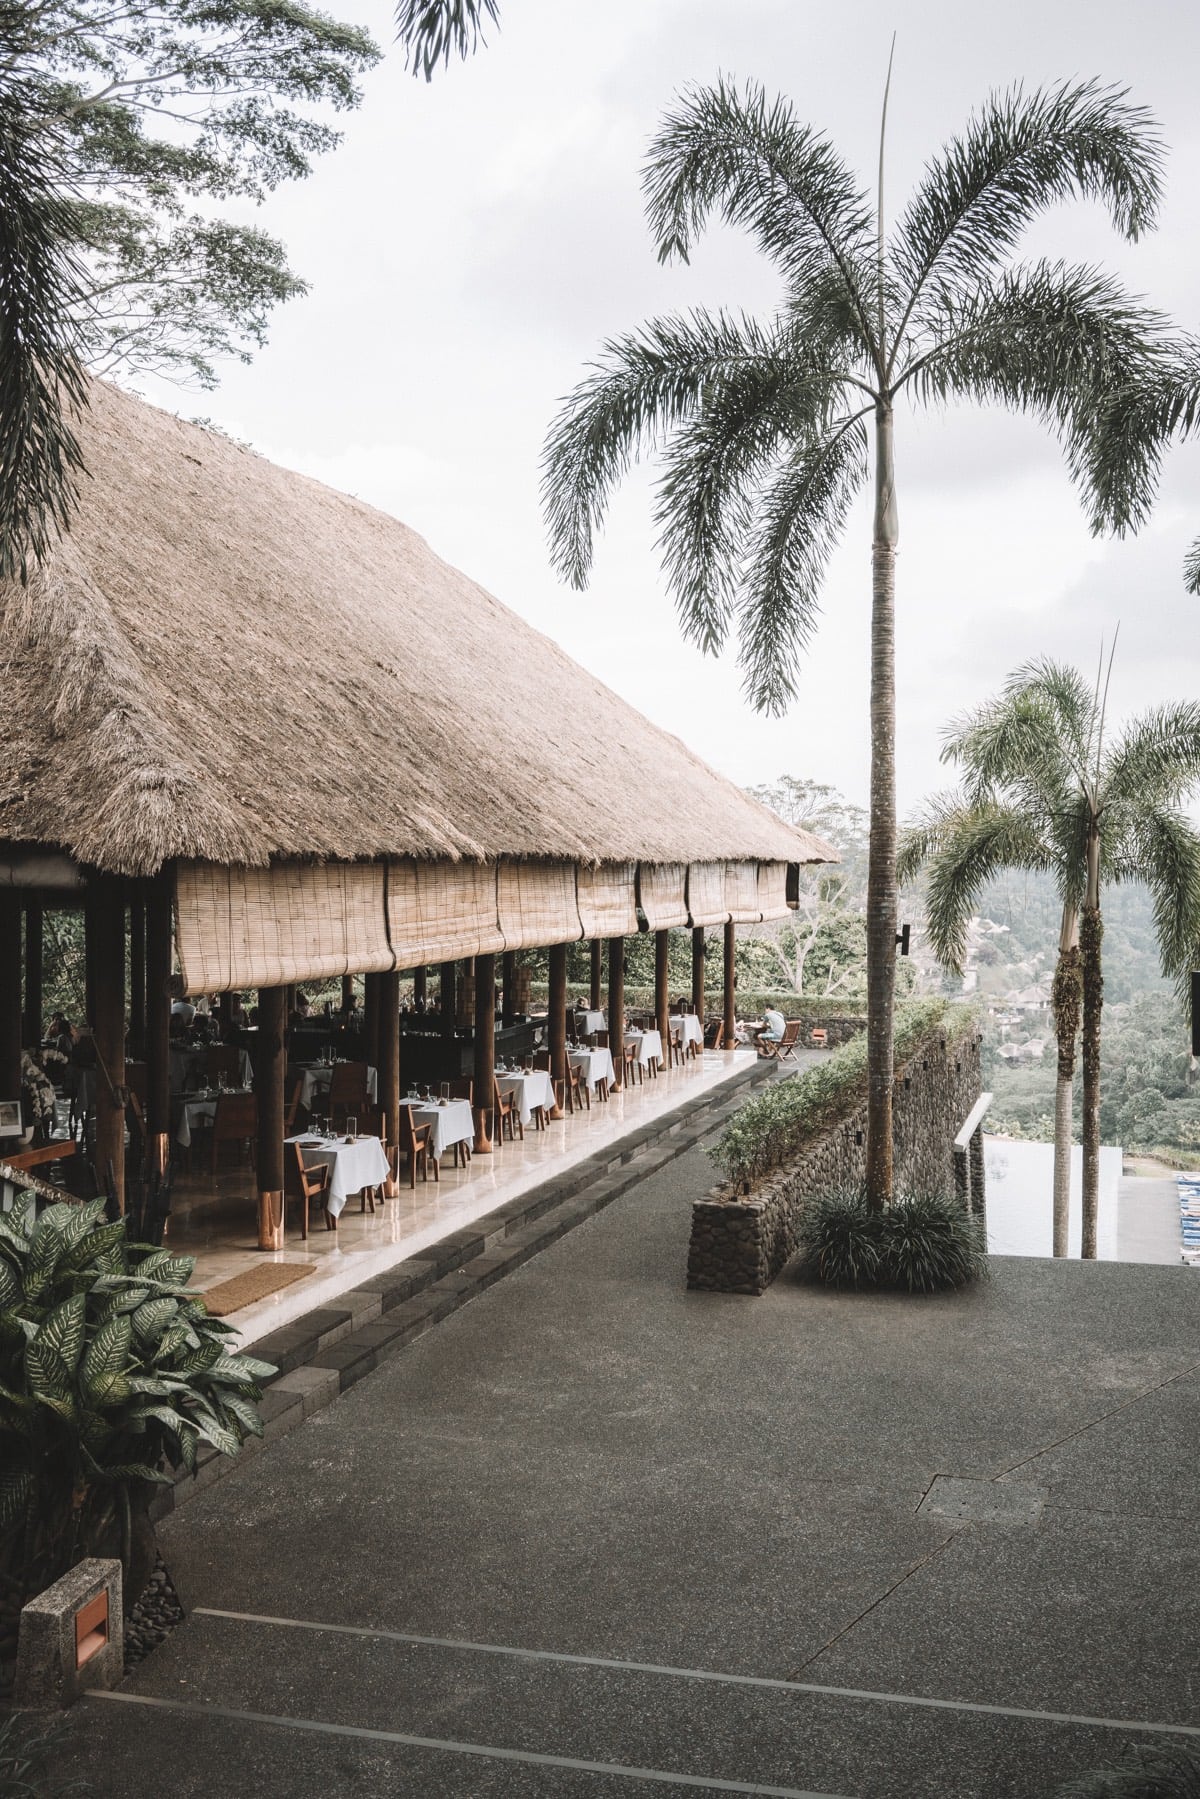 Staying at the Alila Ubud in Bali, Indonesia